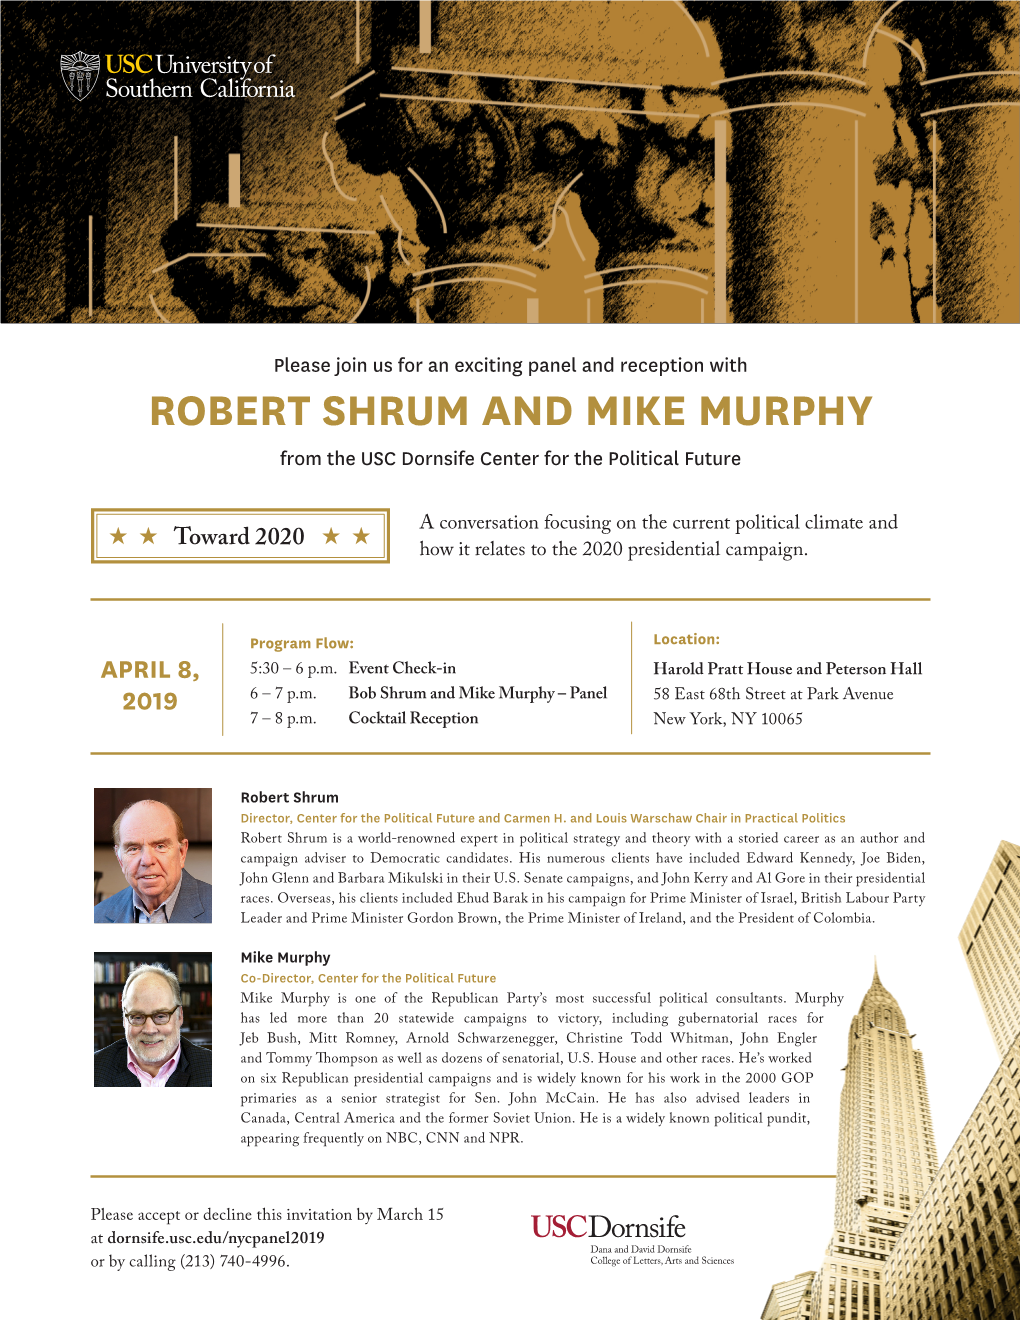 ROBERT SHRUM and MIKE MURPHY from the USC Dornsife Center for the Political Future